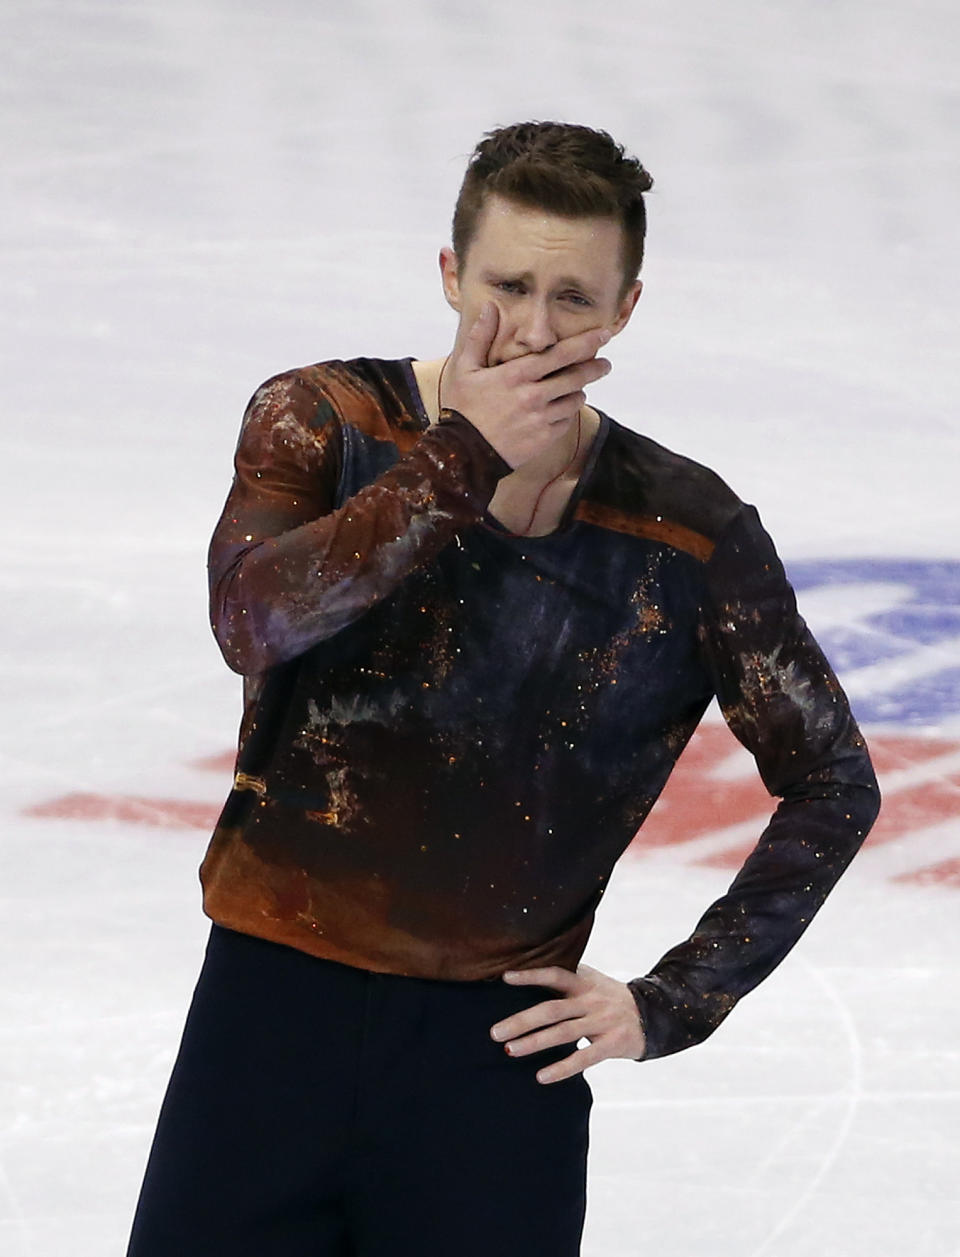 Jeremy Abbott reacts after skating in the men's free skate at the U.S. Figure Skating Championships in Boston, Sunday, Jan. 12, 2014. (AP Photo/Elise Amendola)